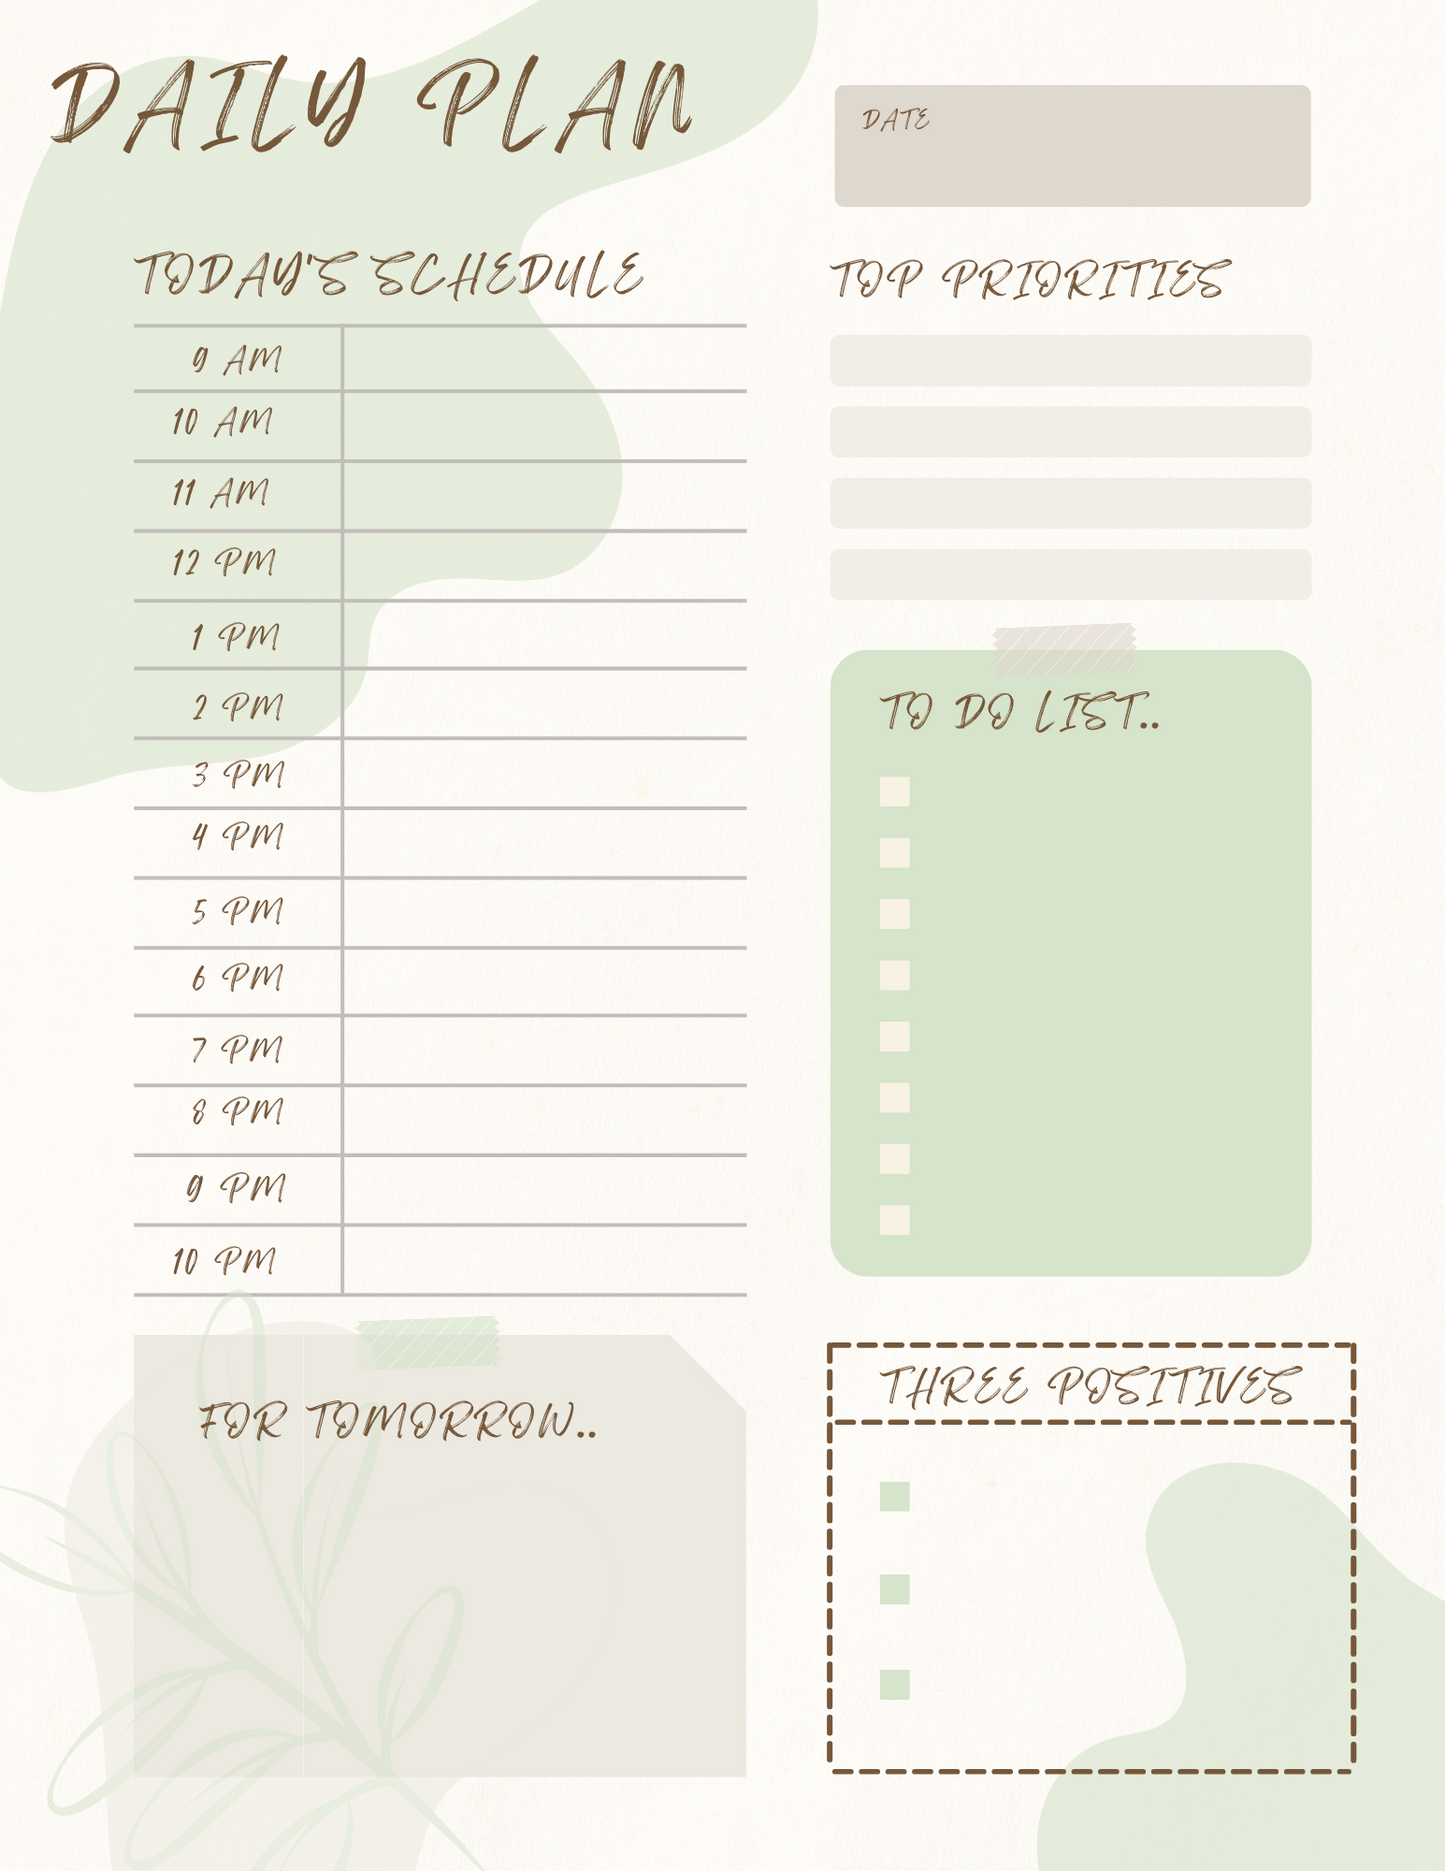 Daily Plan Page